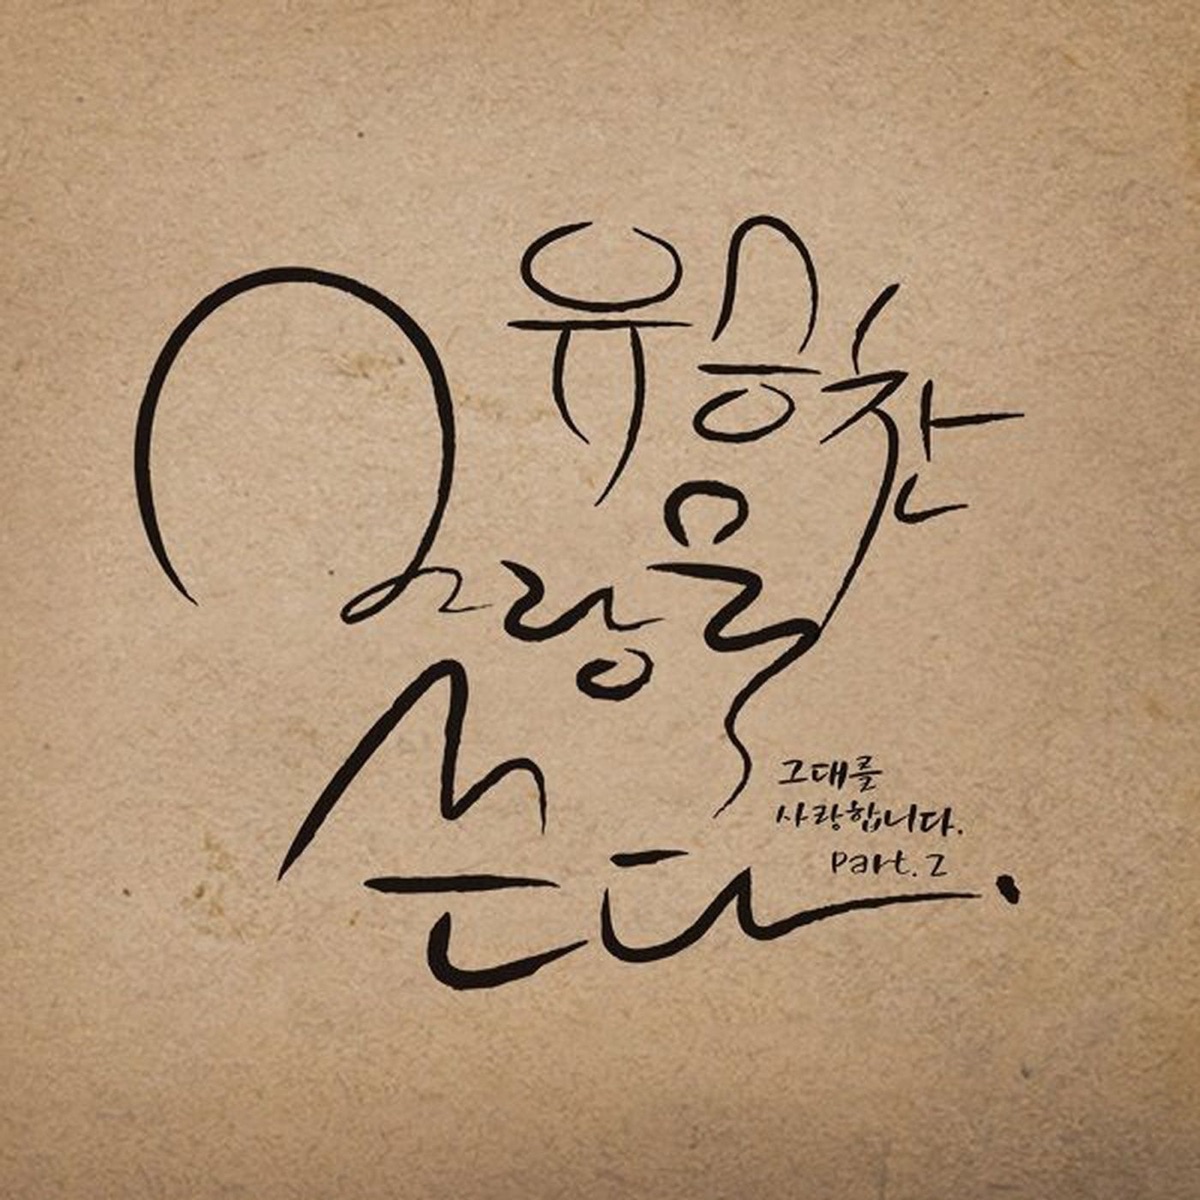 Arang and the Magistrate (Original Soundtrack), Pt. 8 - EP by Yoo Seung Chan  on Apple Music